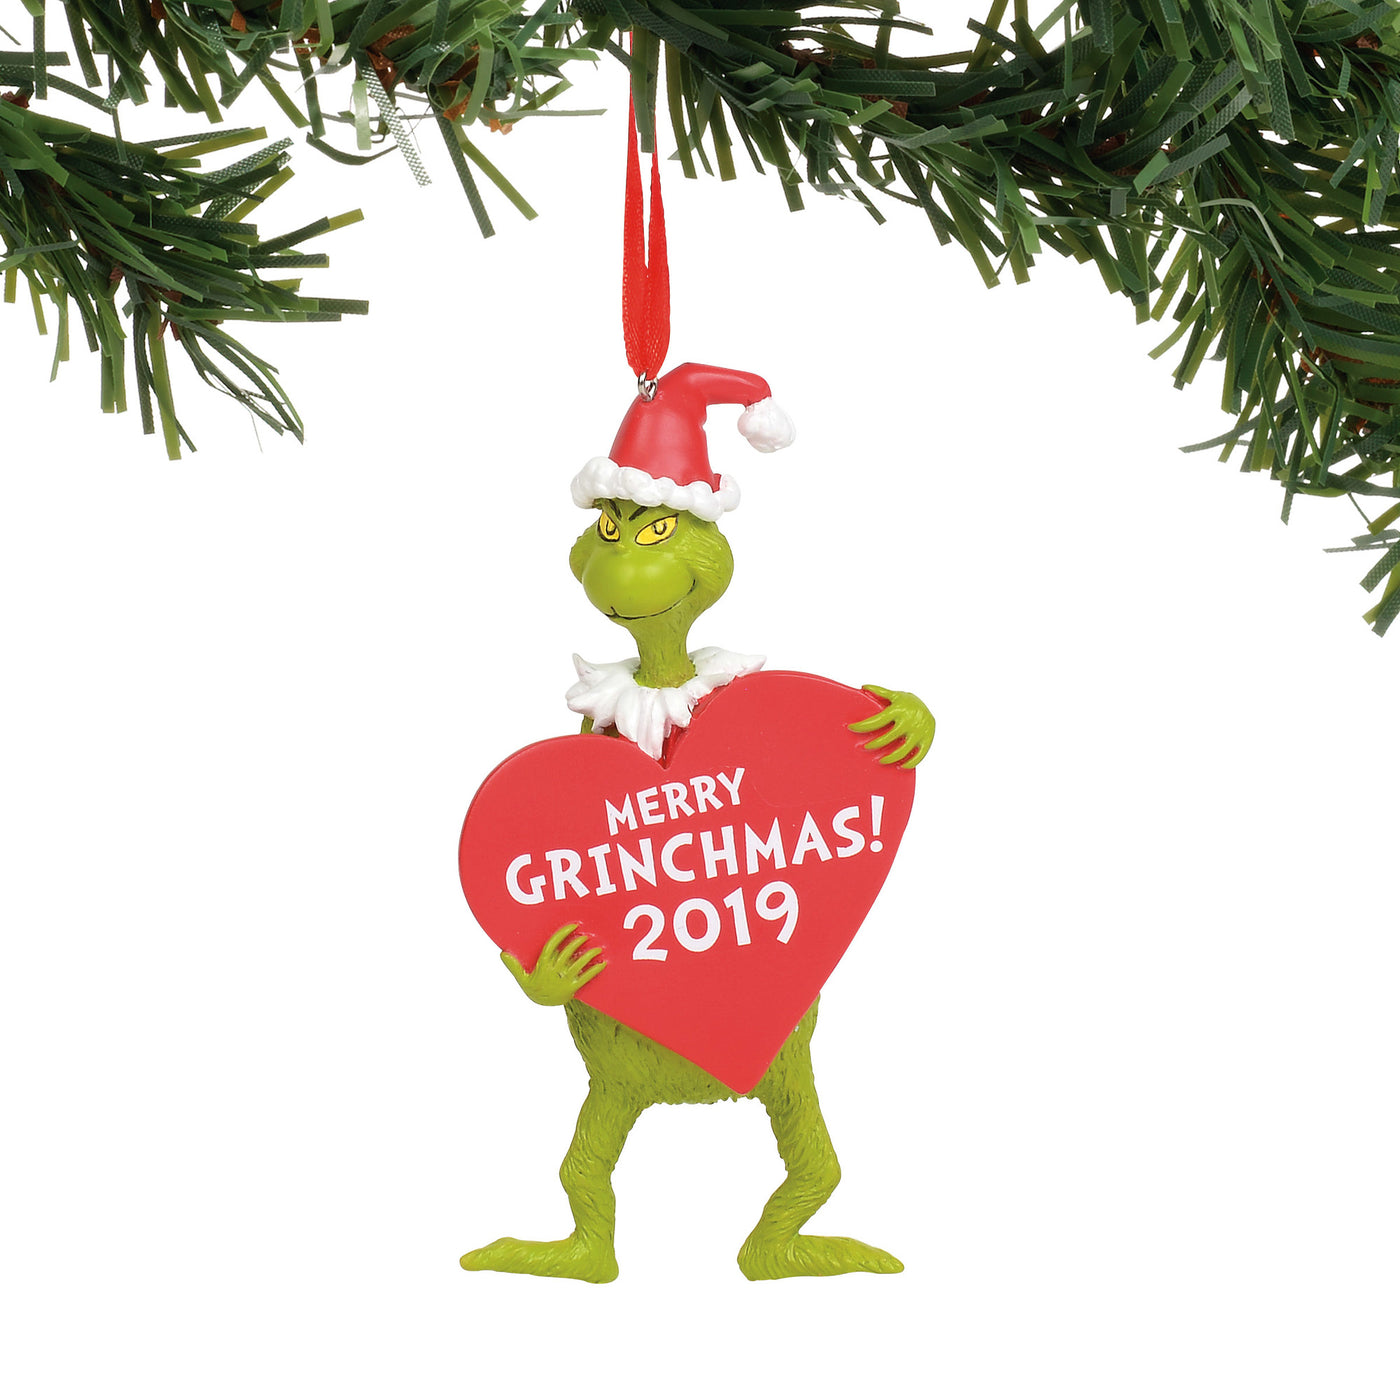 Dr. Seuss Grinch with Heart 2019 Merry Christmas Ornament New with Box